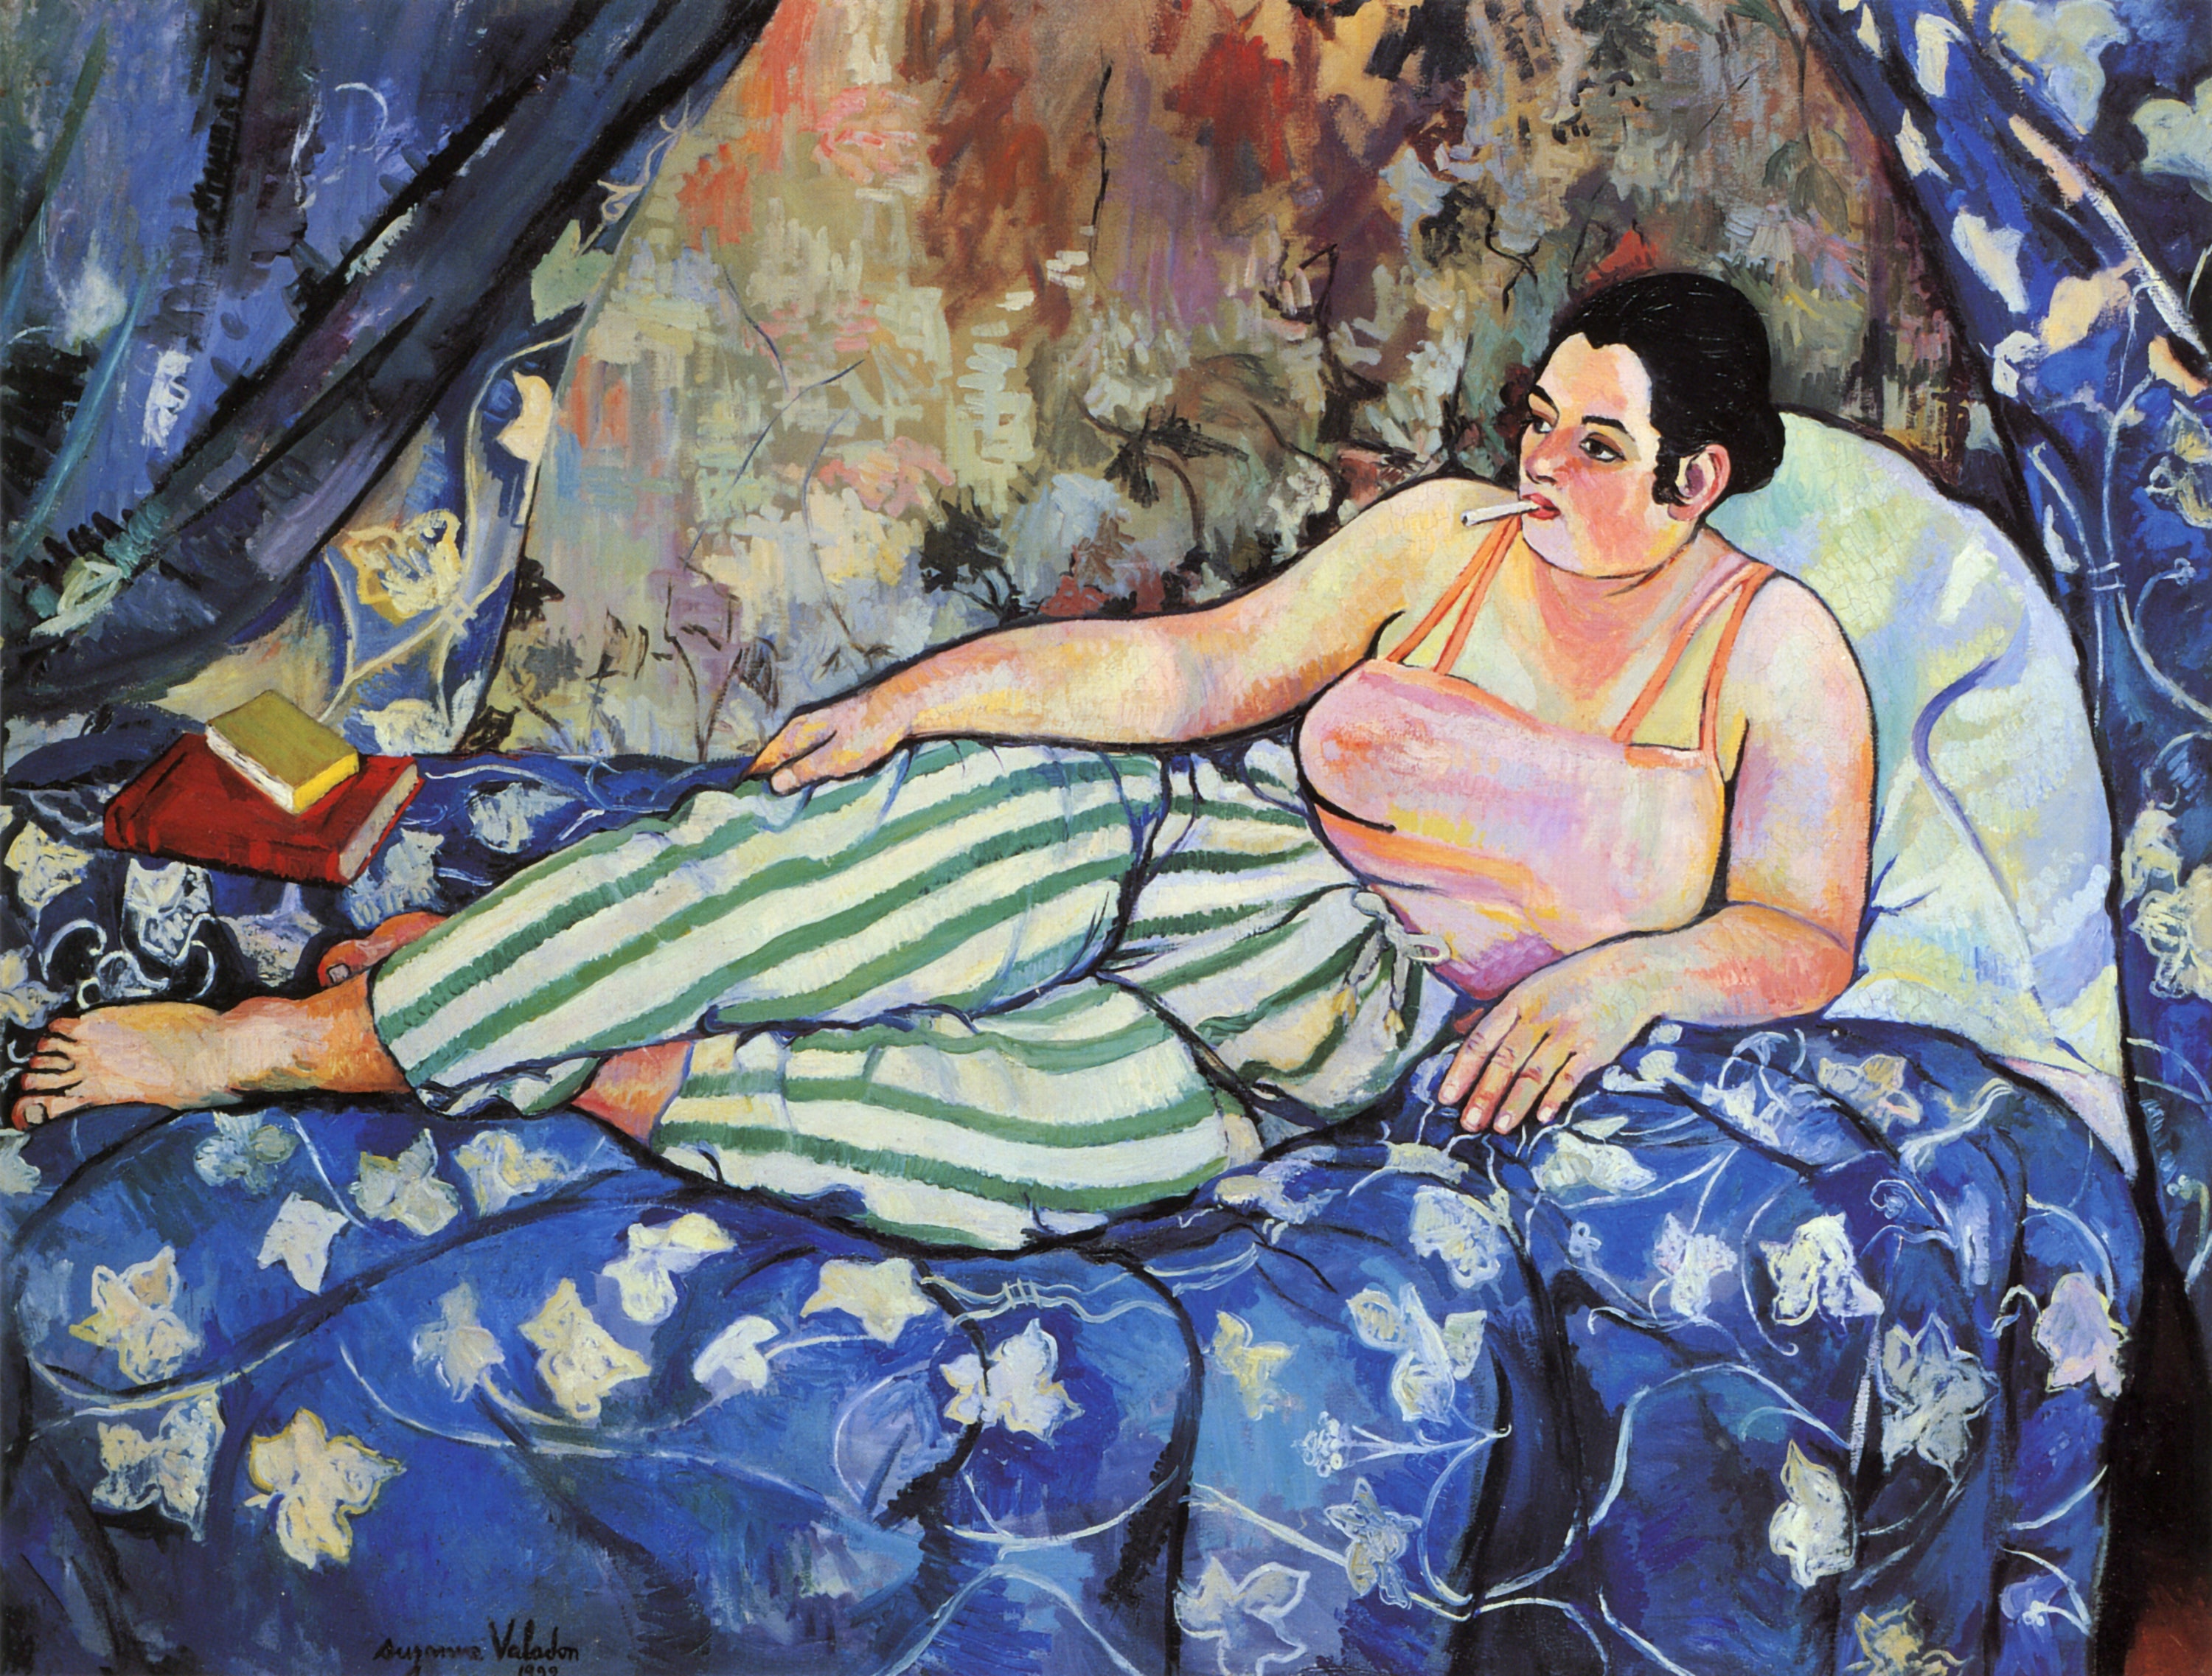 The Blue Room by Suzanne Valadon | Obelisk Art History